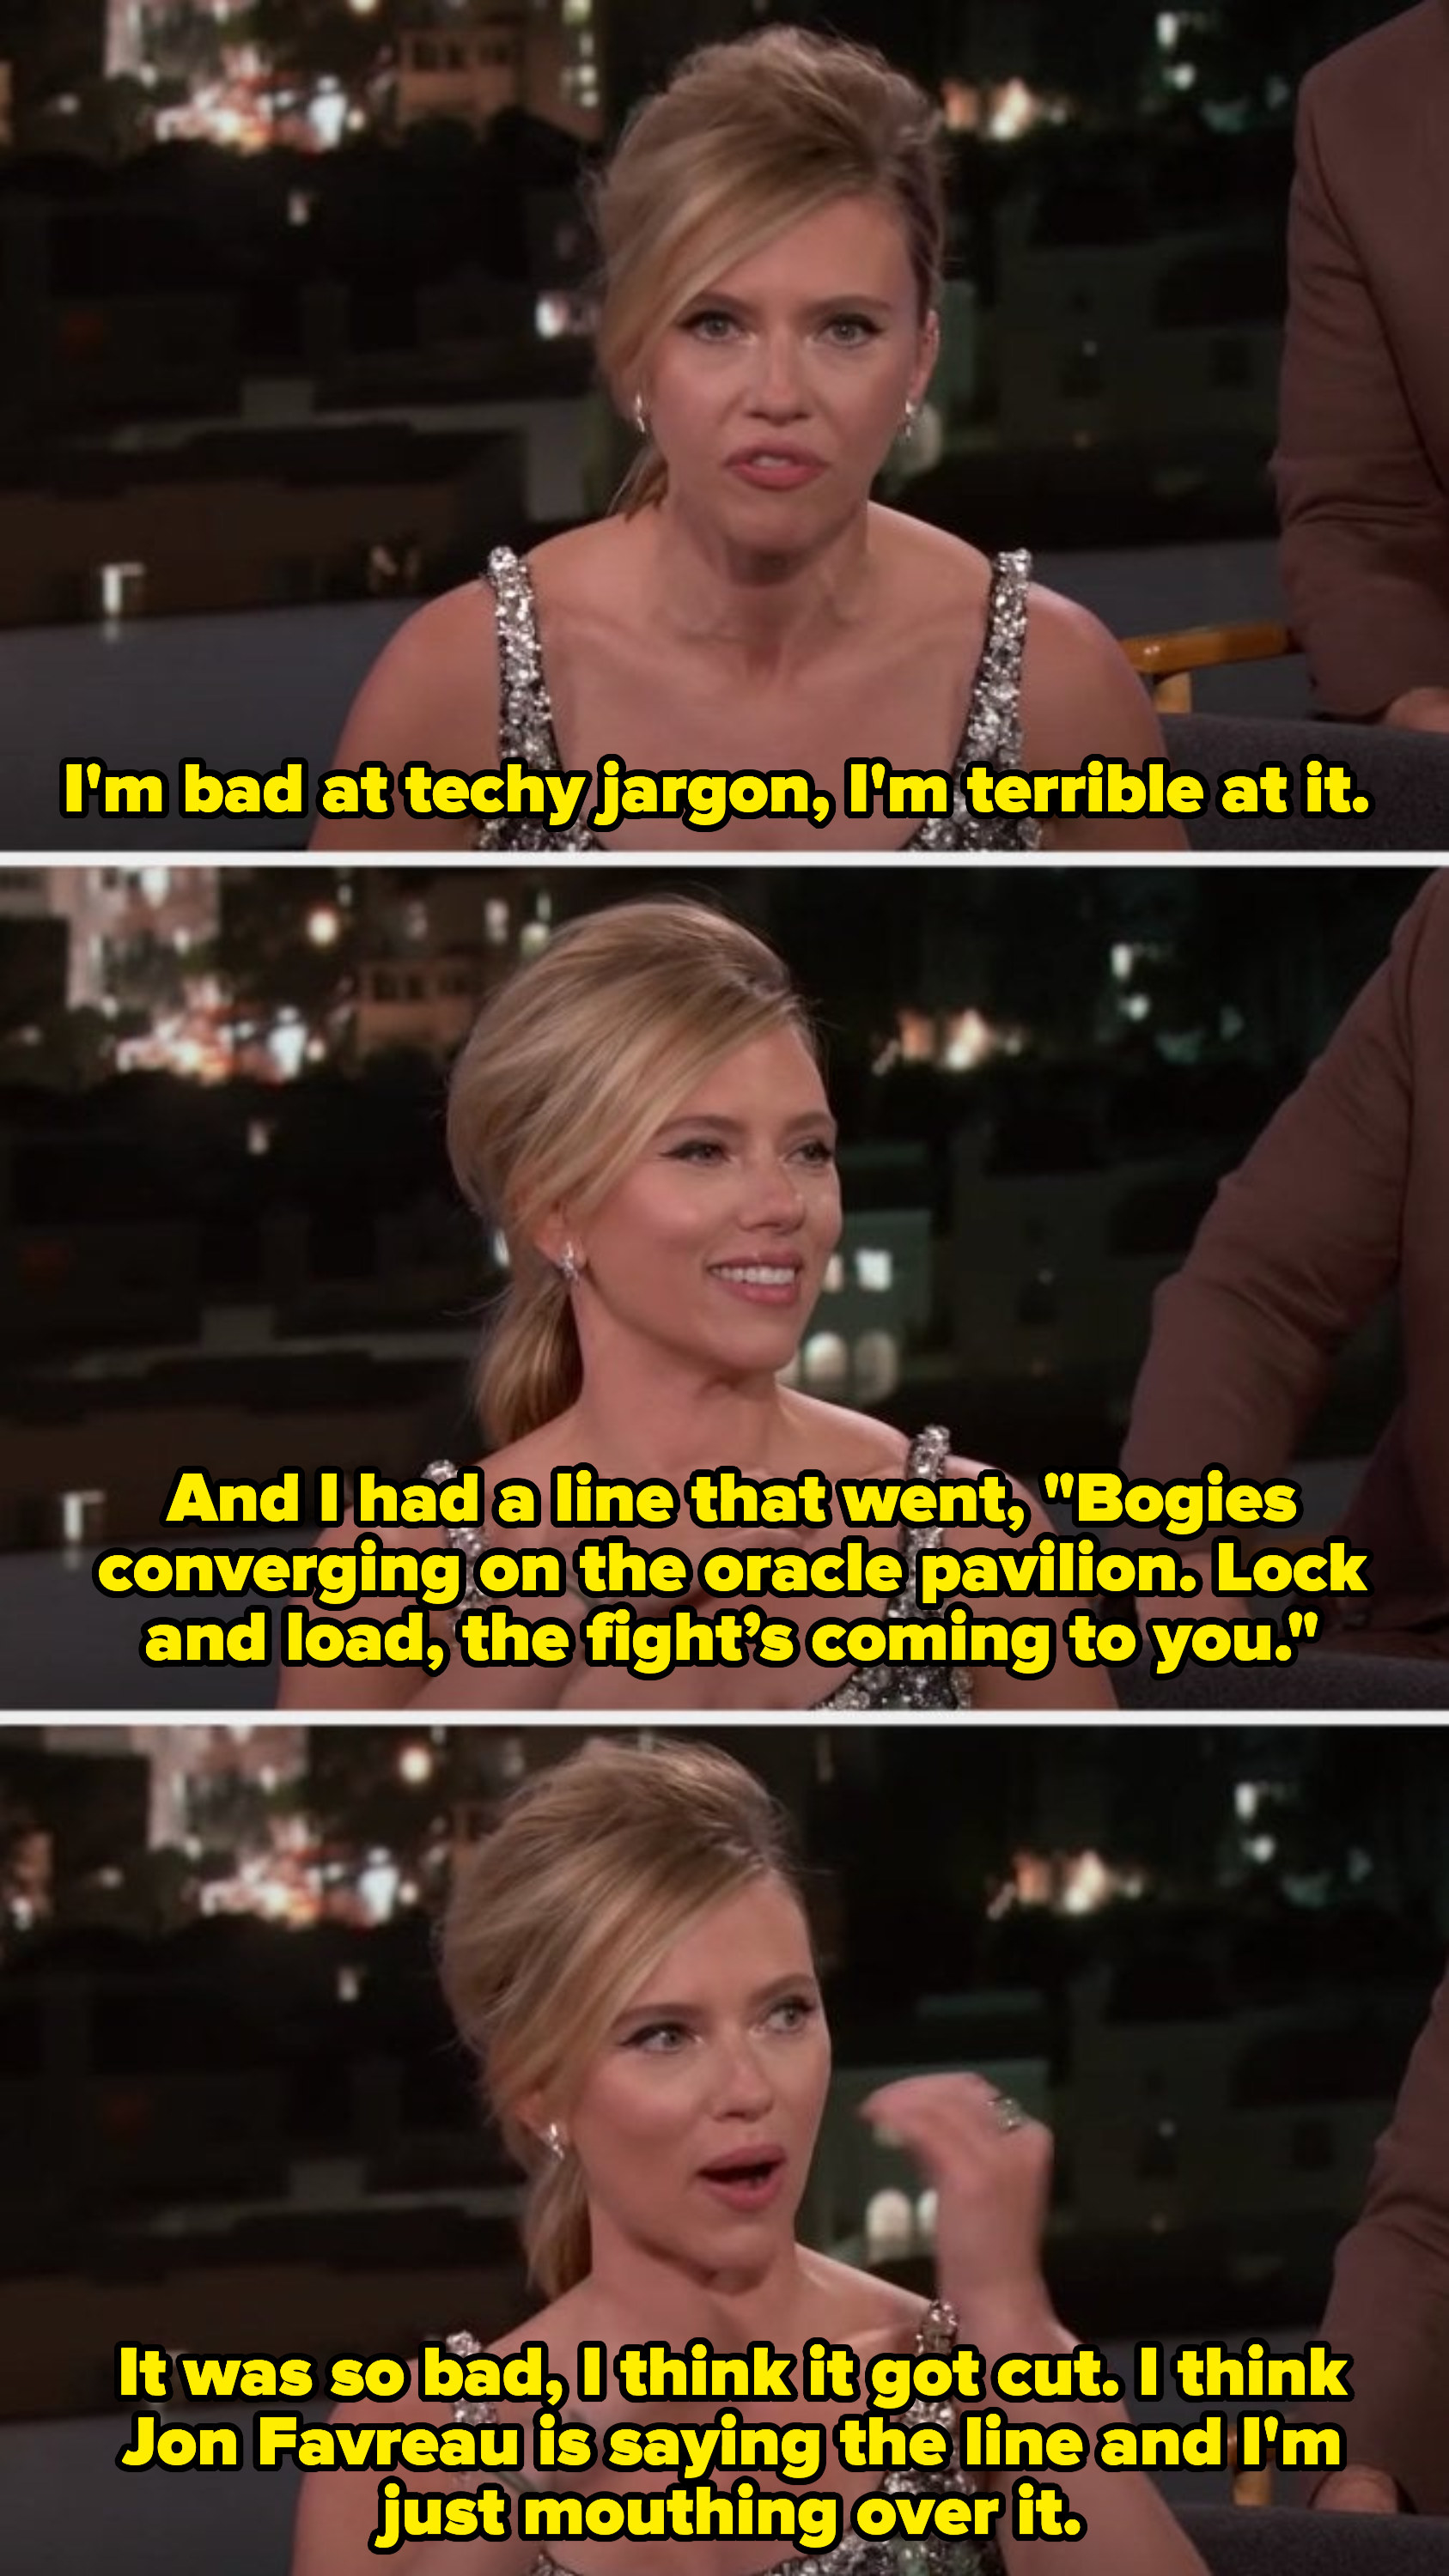  When Jimmy Kimmel asked Scarlett Johansson about her favorite Black Widow Line, but she happened to share her Iron Man 2 fail.